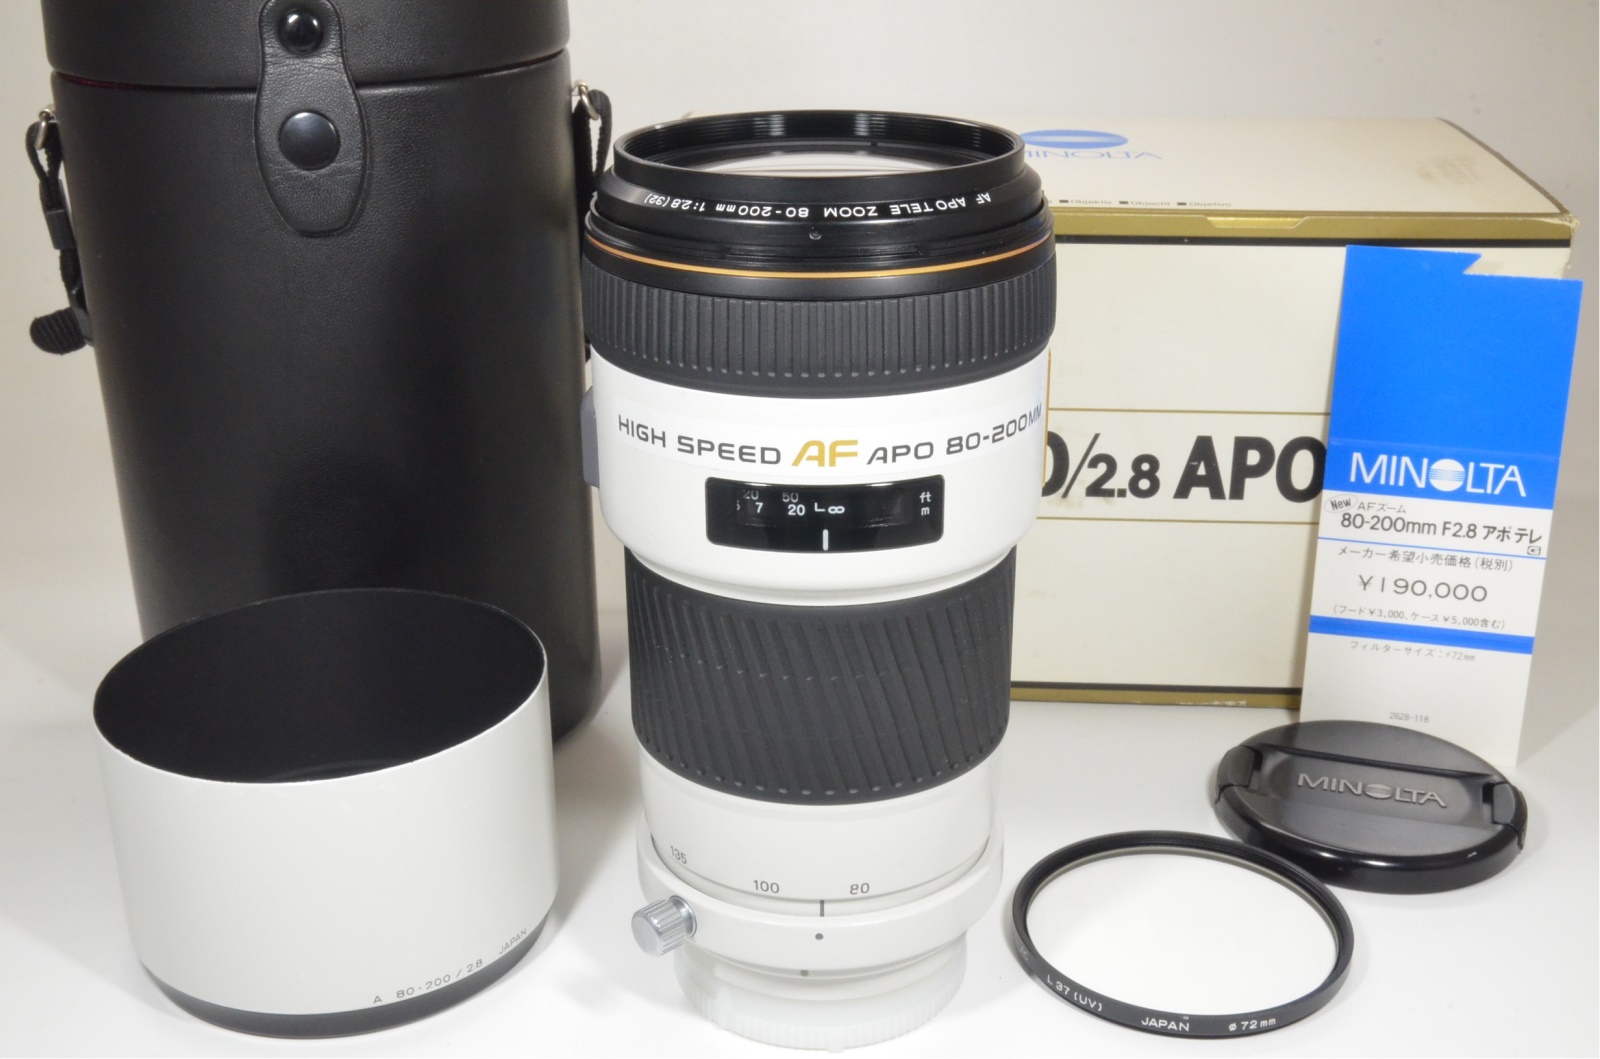 MINOLTA High Speed AF APO 80-200mm f2.8 G Lens Sony with Case and